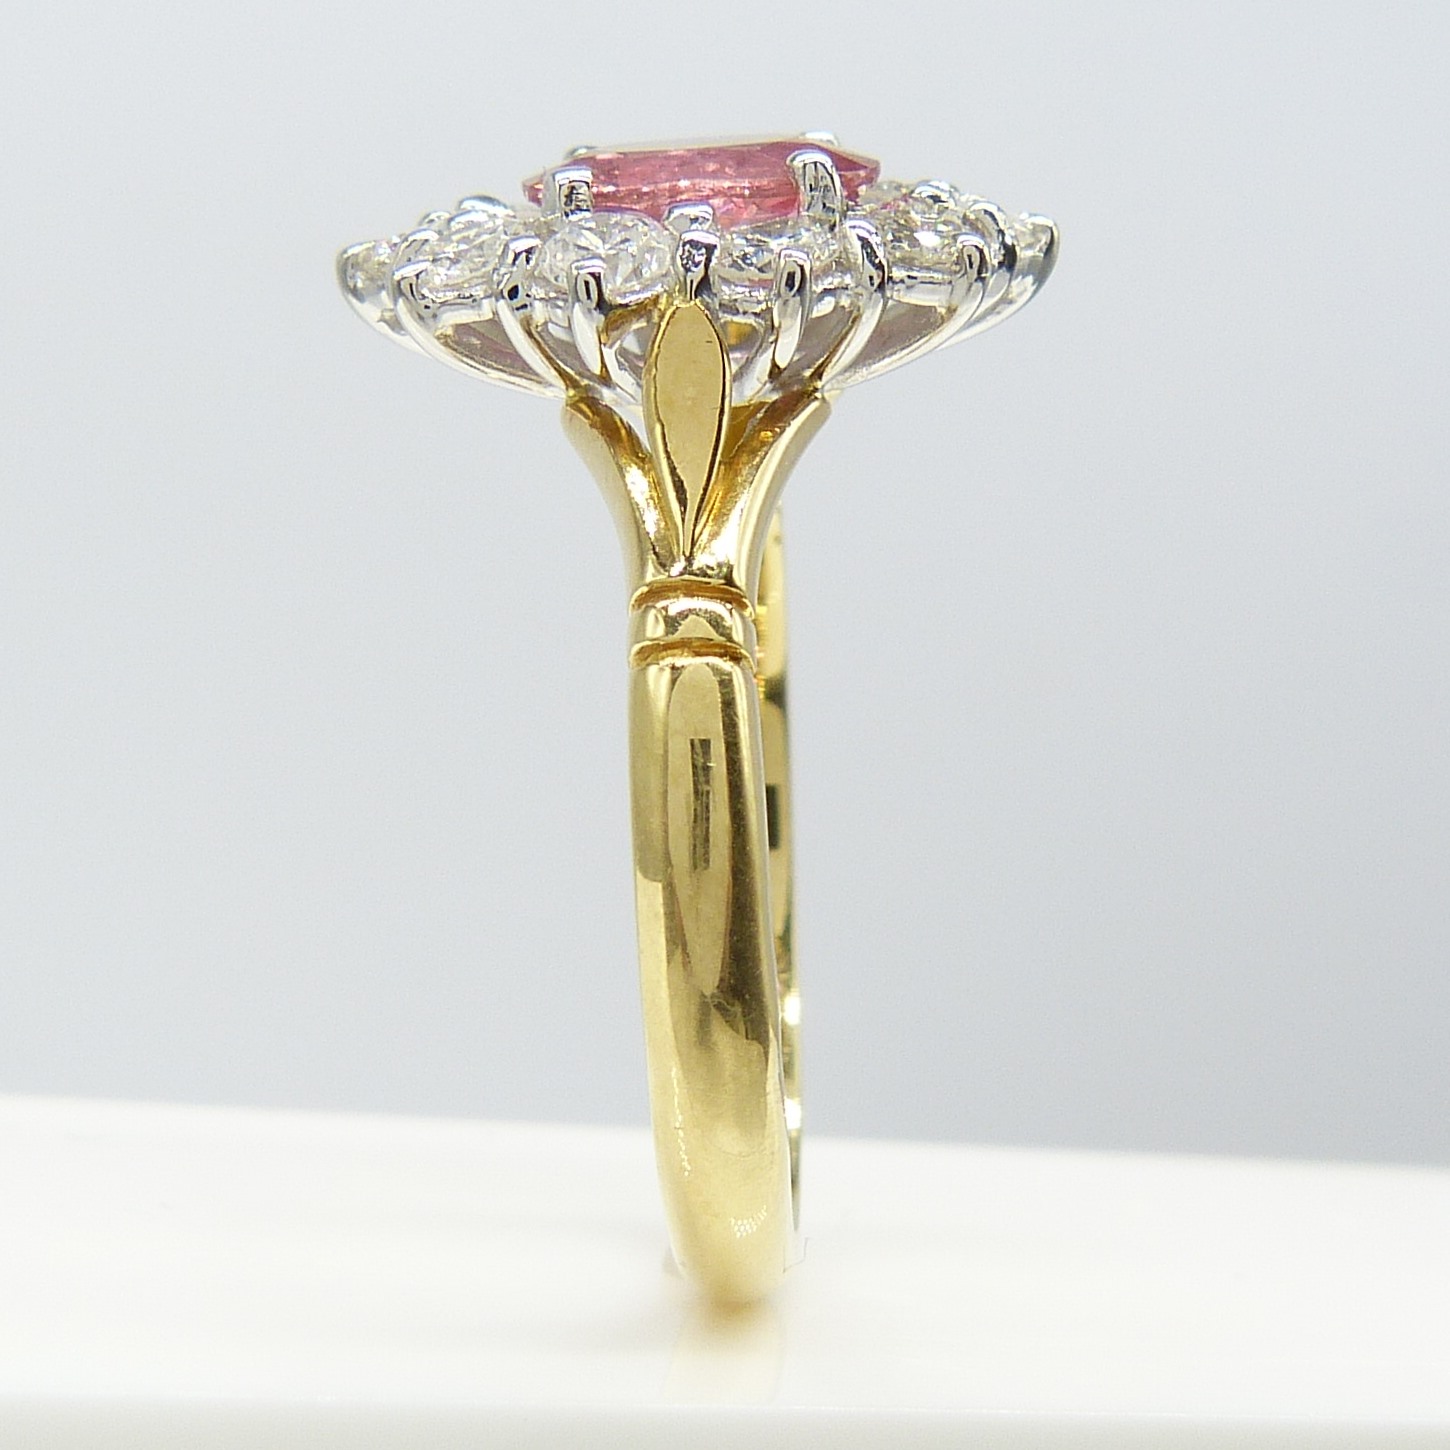 A pinkish-red natural Ruby and Diamond cluster ring in 18ct yellow and white Gold - Image 10 of 10